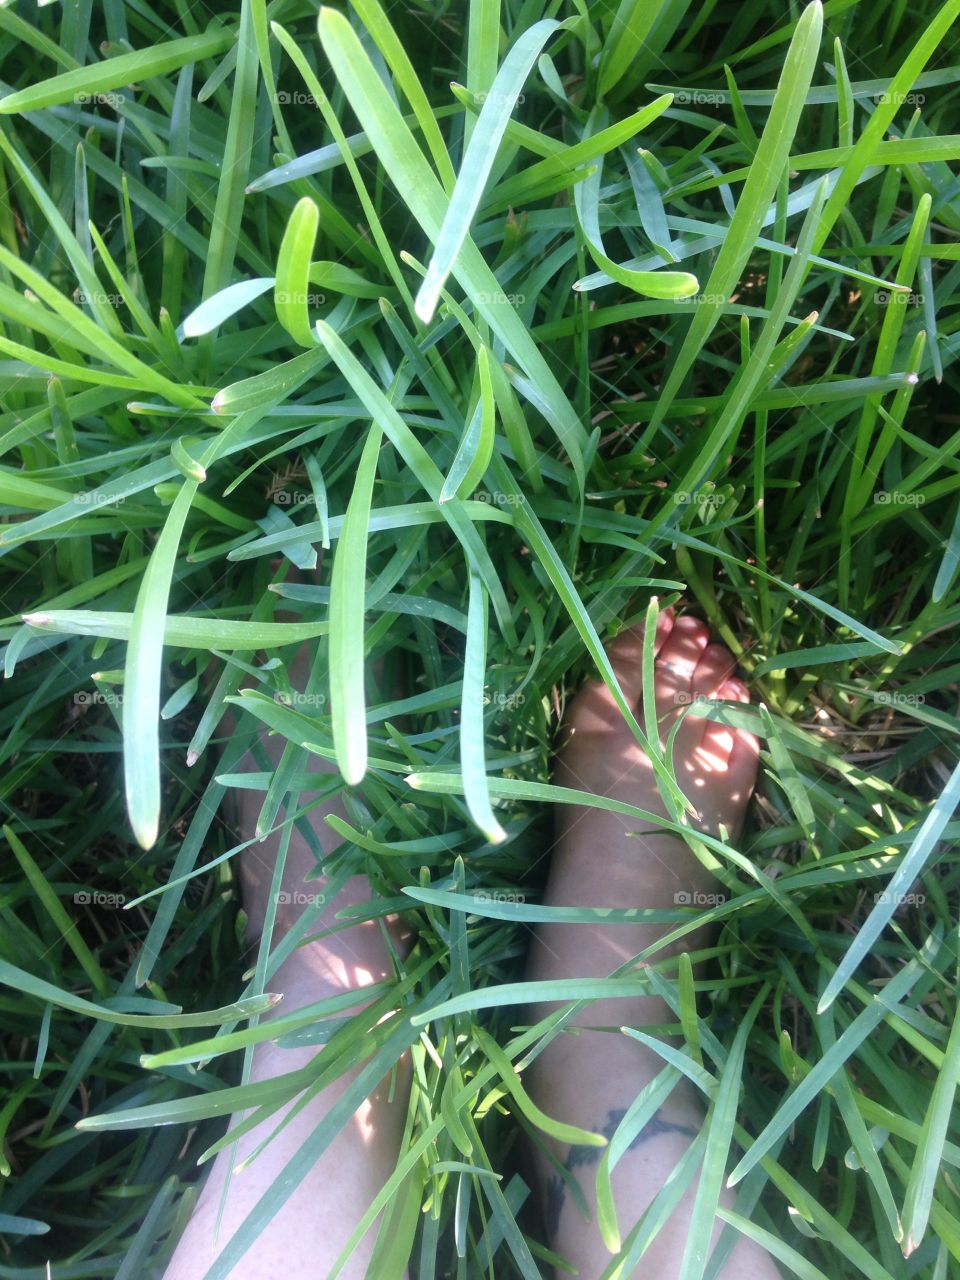 Barefoot in the tall grass